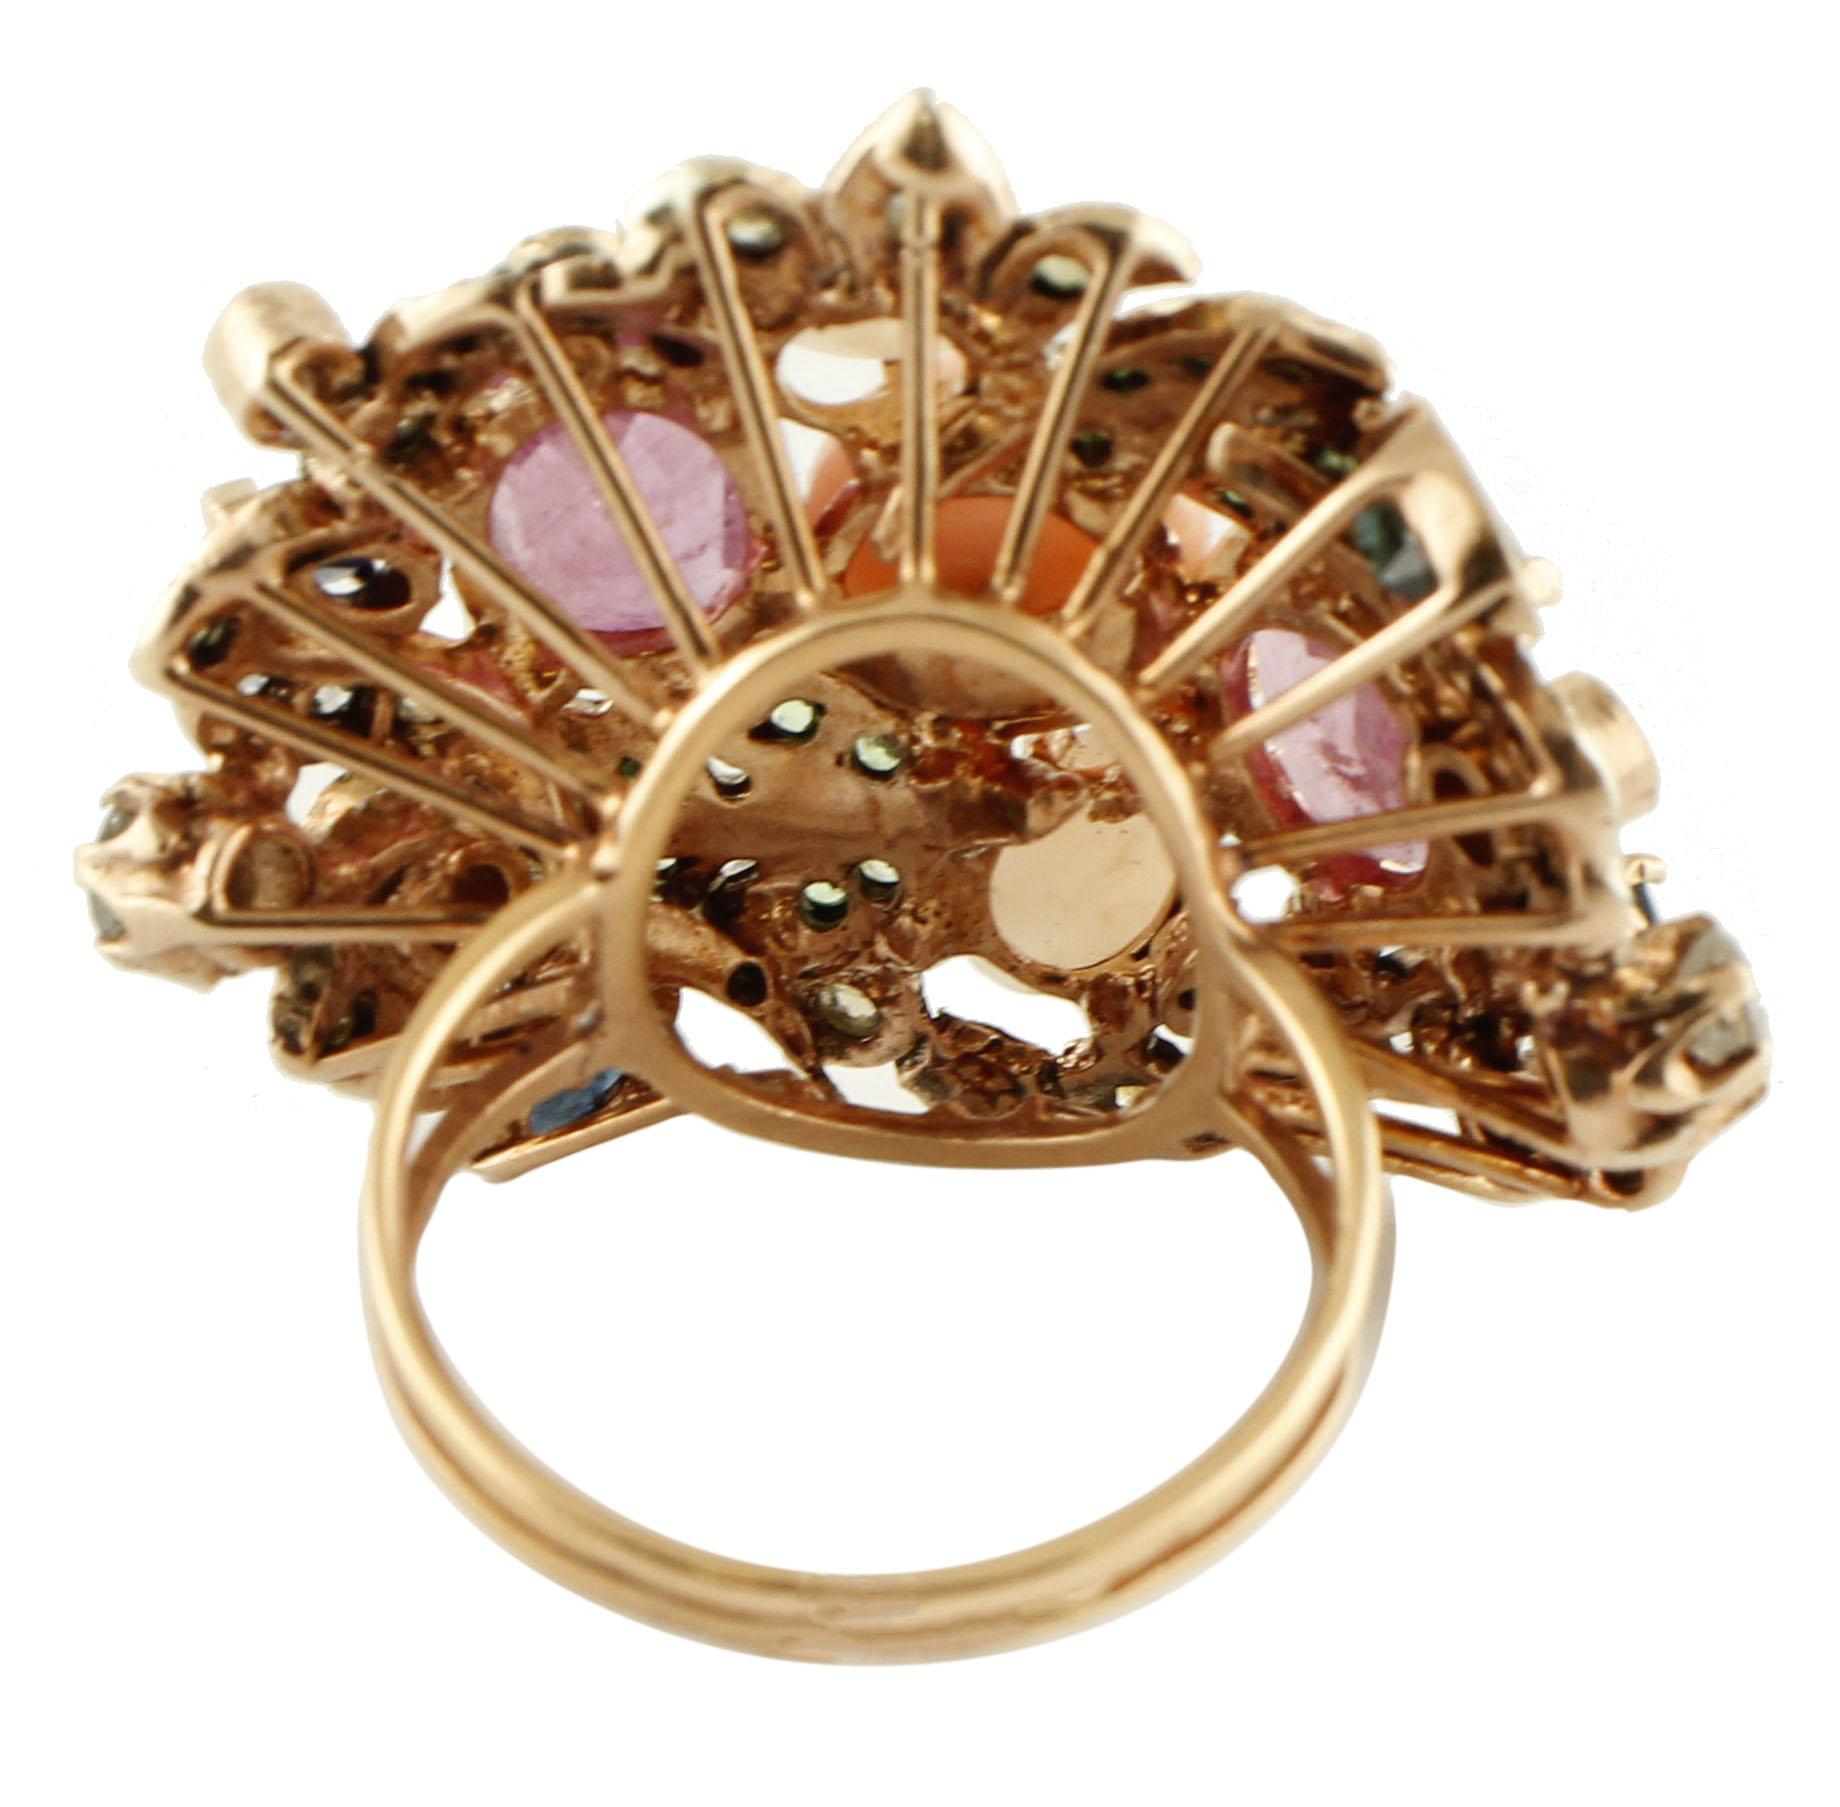 Retro Diamonds, Rubies, Blue Sapphires, Corals, Tsavorites Rose Gold and Silver Ring